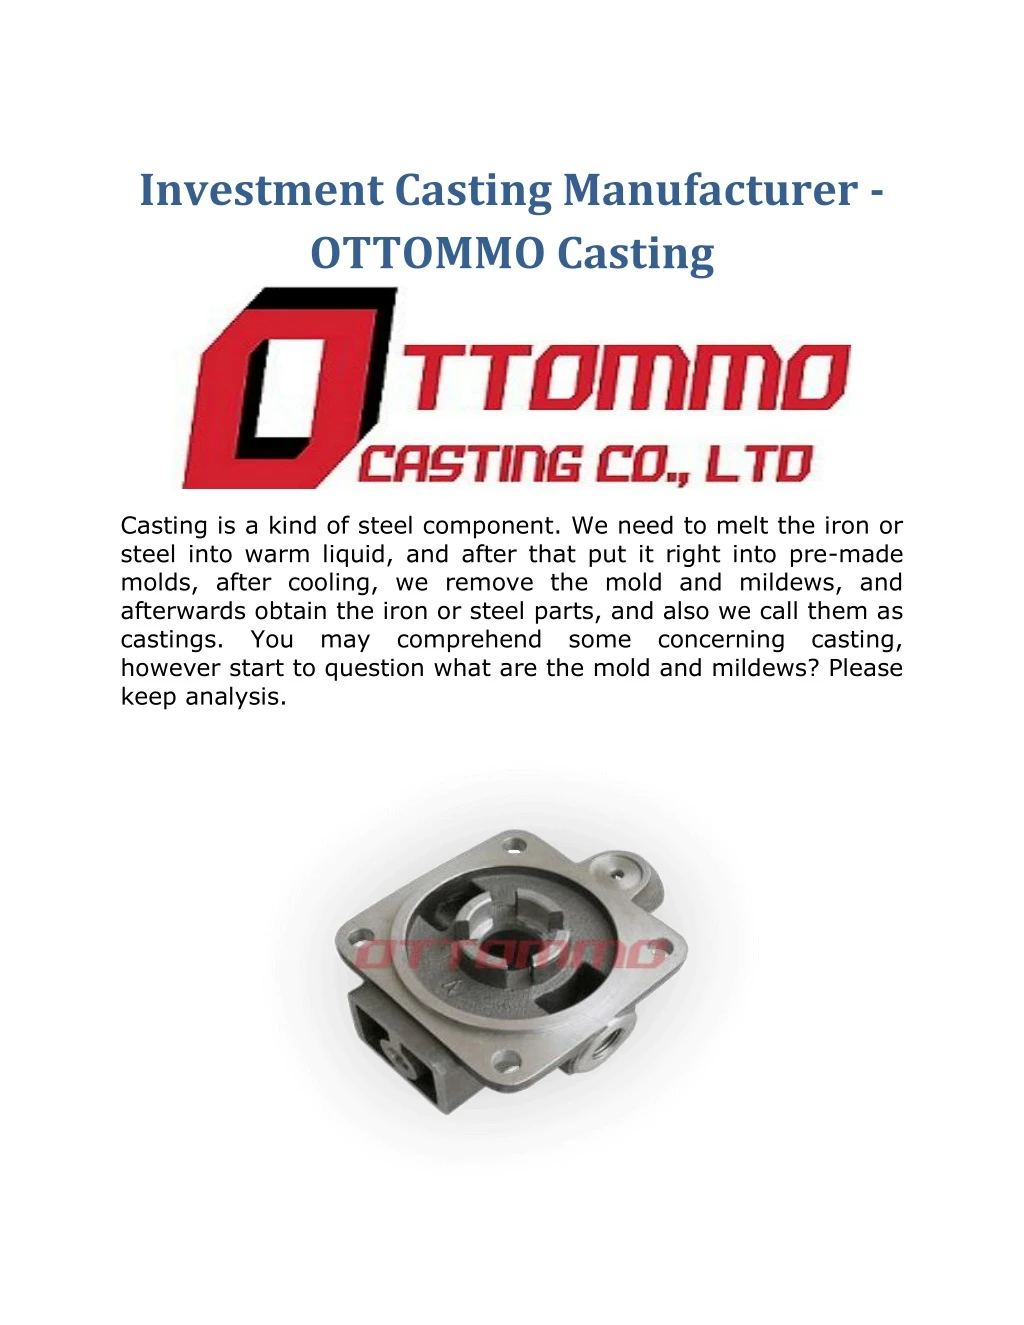 investment casting manufacturer ottommo casting